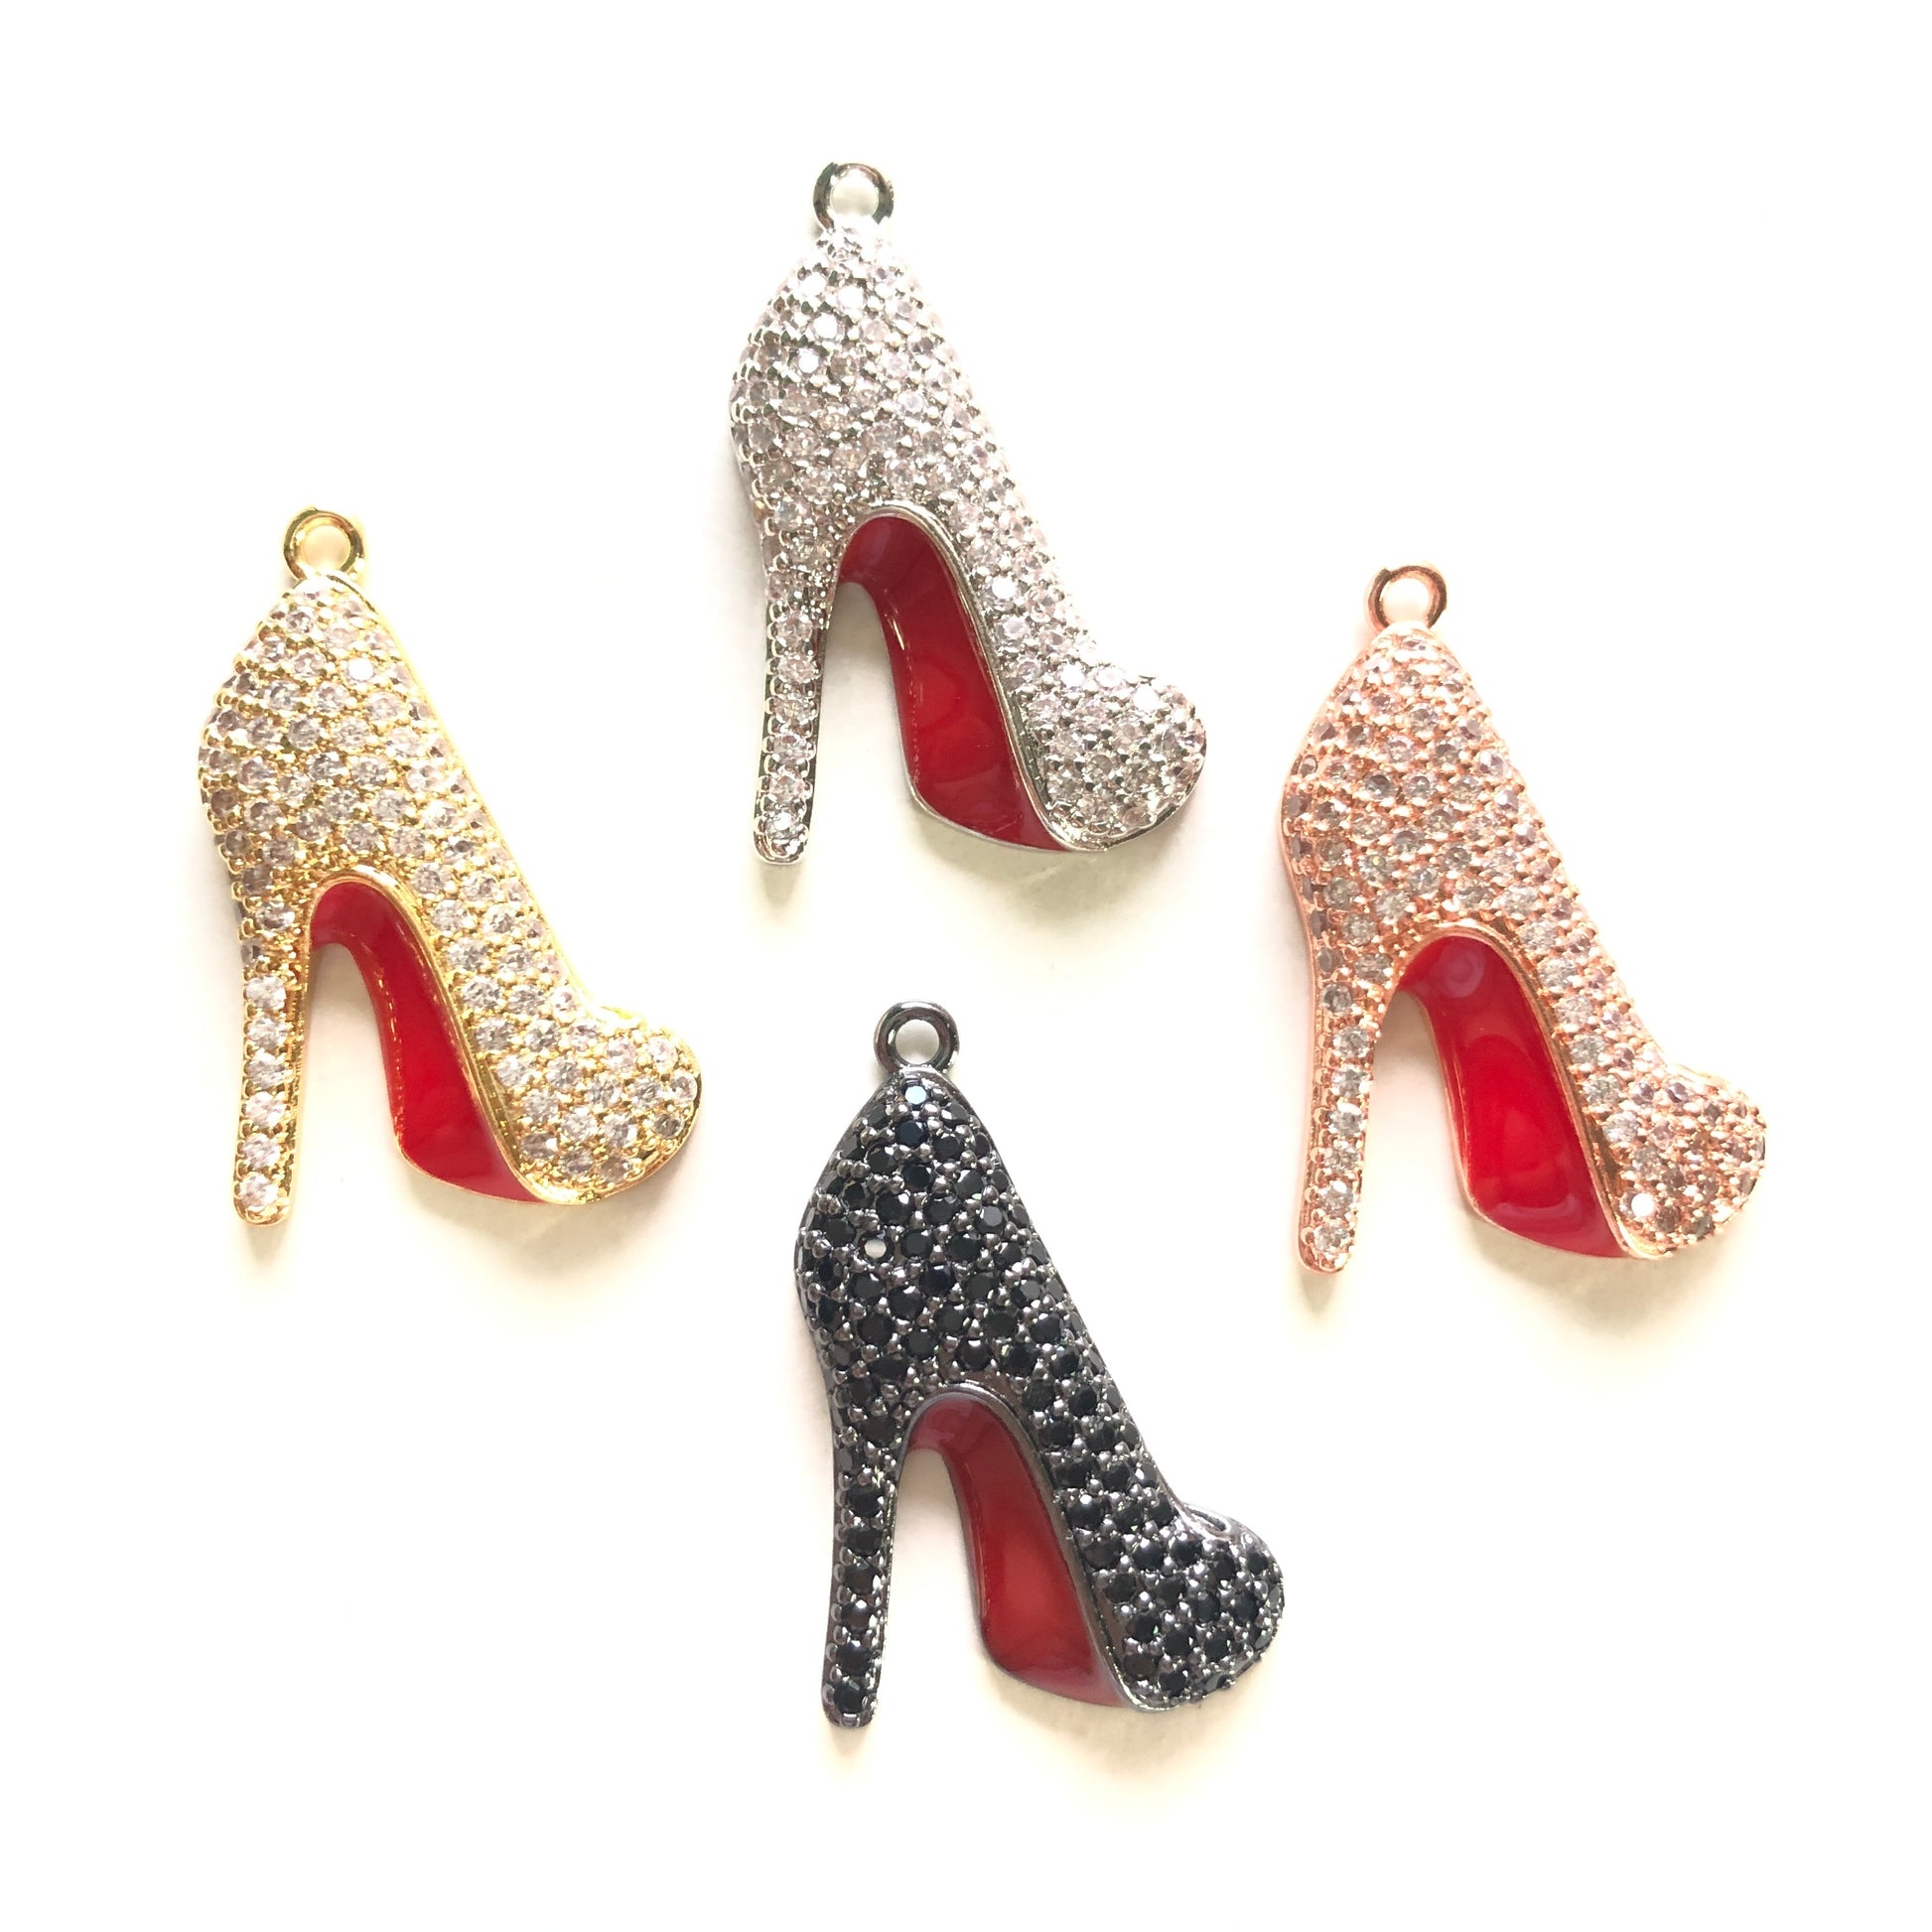 5 Pcs High Heel Shoe Charms Cubic Zirconia Paved Metal Pendant for